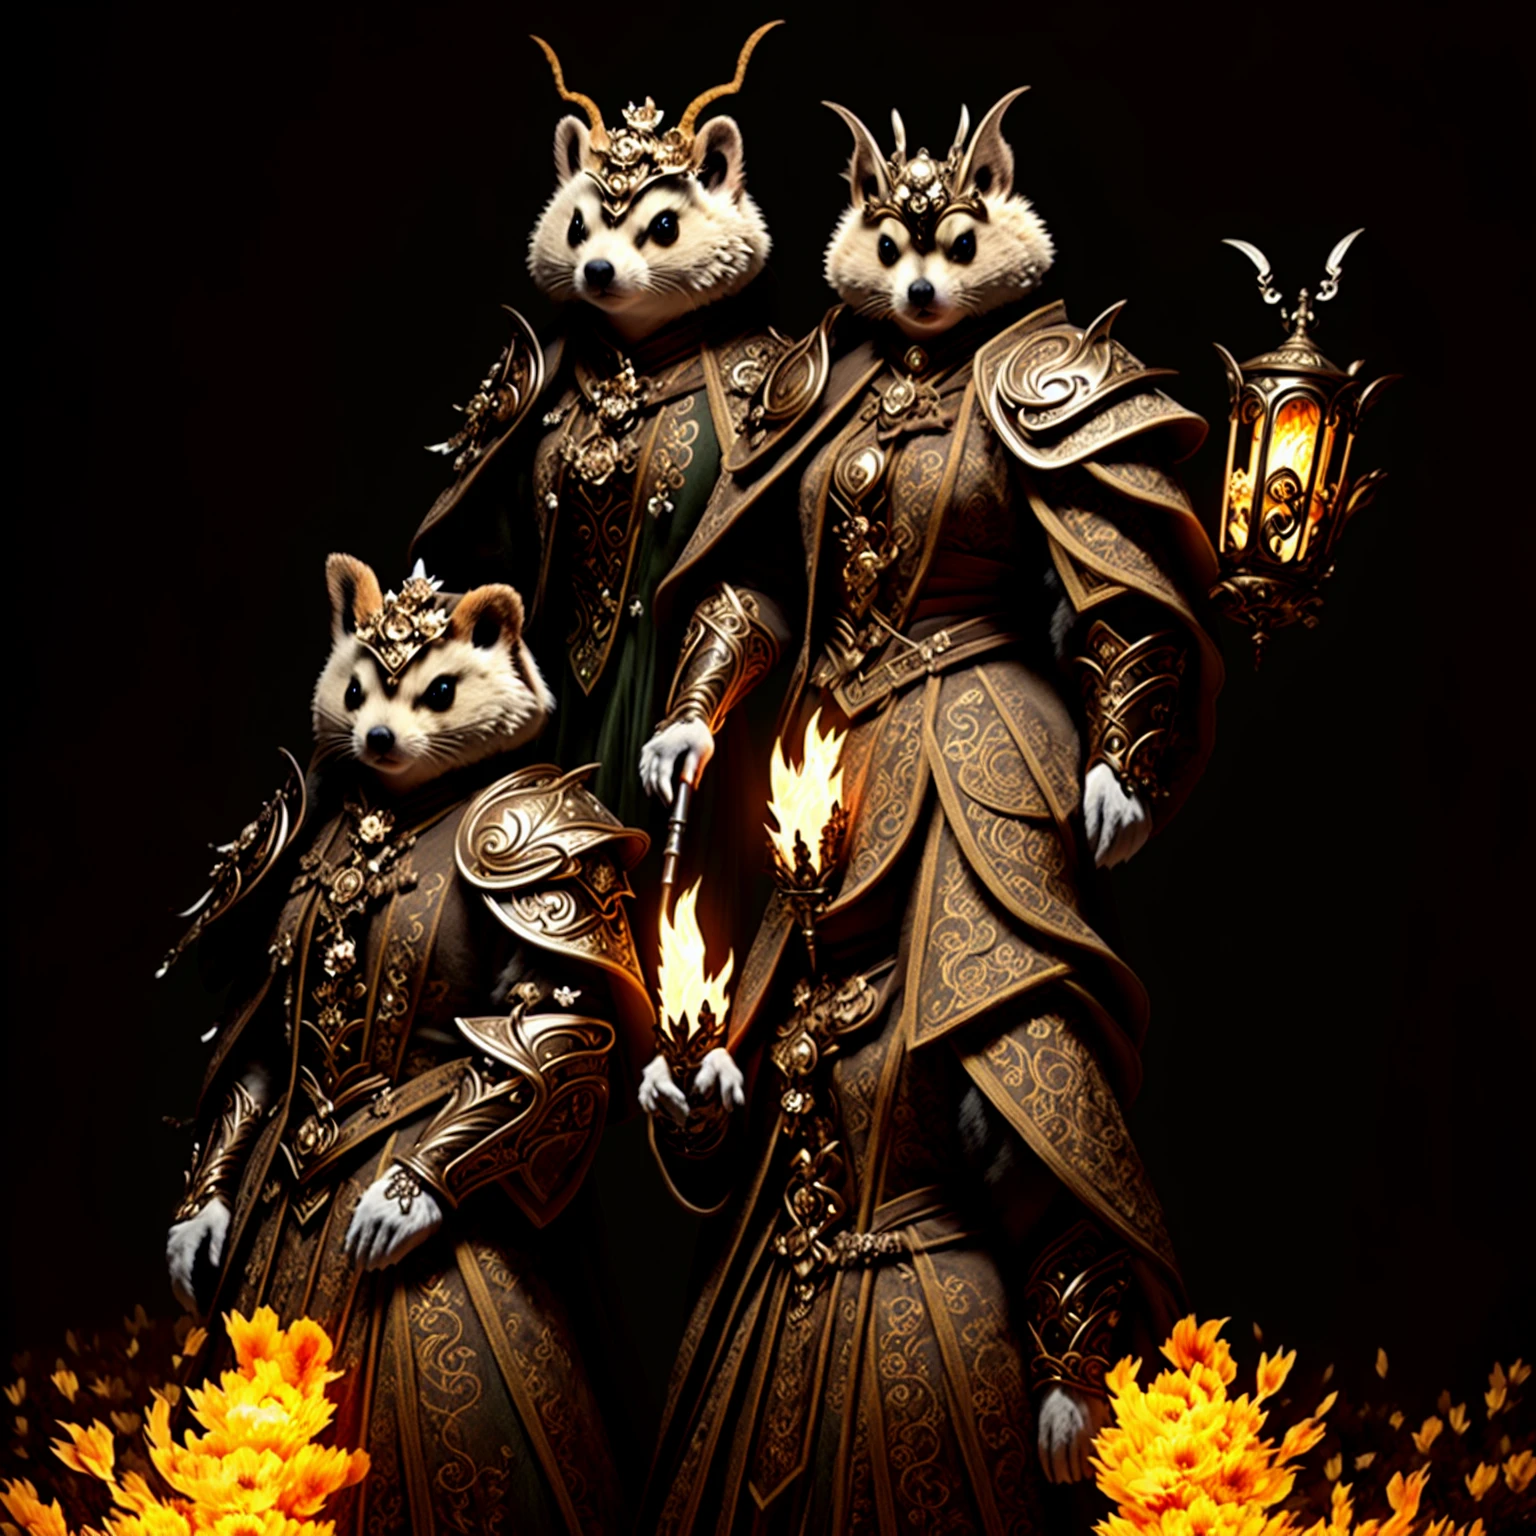 Araffe dressed in a costume with a flower helmet and a sword, hedgehog magus, kitsune inspired armor, tabaxi monk, ornate cosplay, hyperdetailed fantasy character, the squirrel king, costumed anthropomorphic otter, kitsune holding torch, dressed in an old suit, fantasy character photo, portrait of a forest mage, Portrait photo